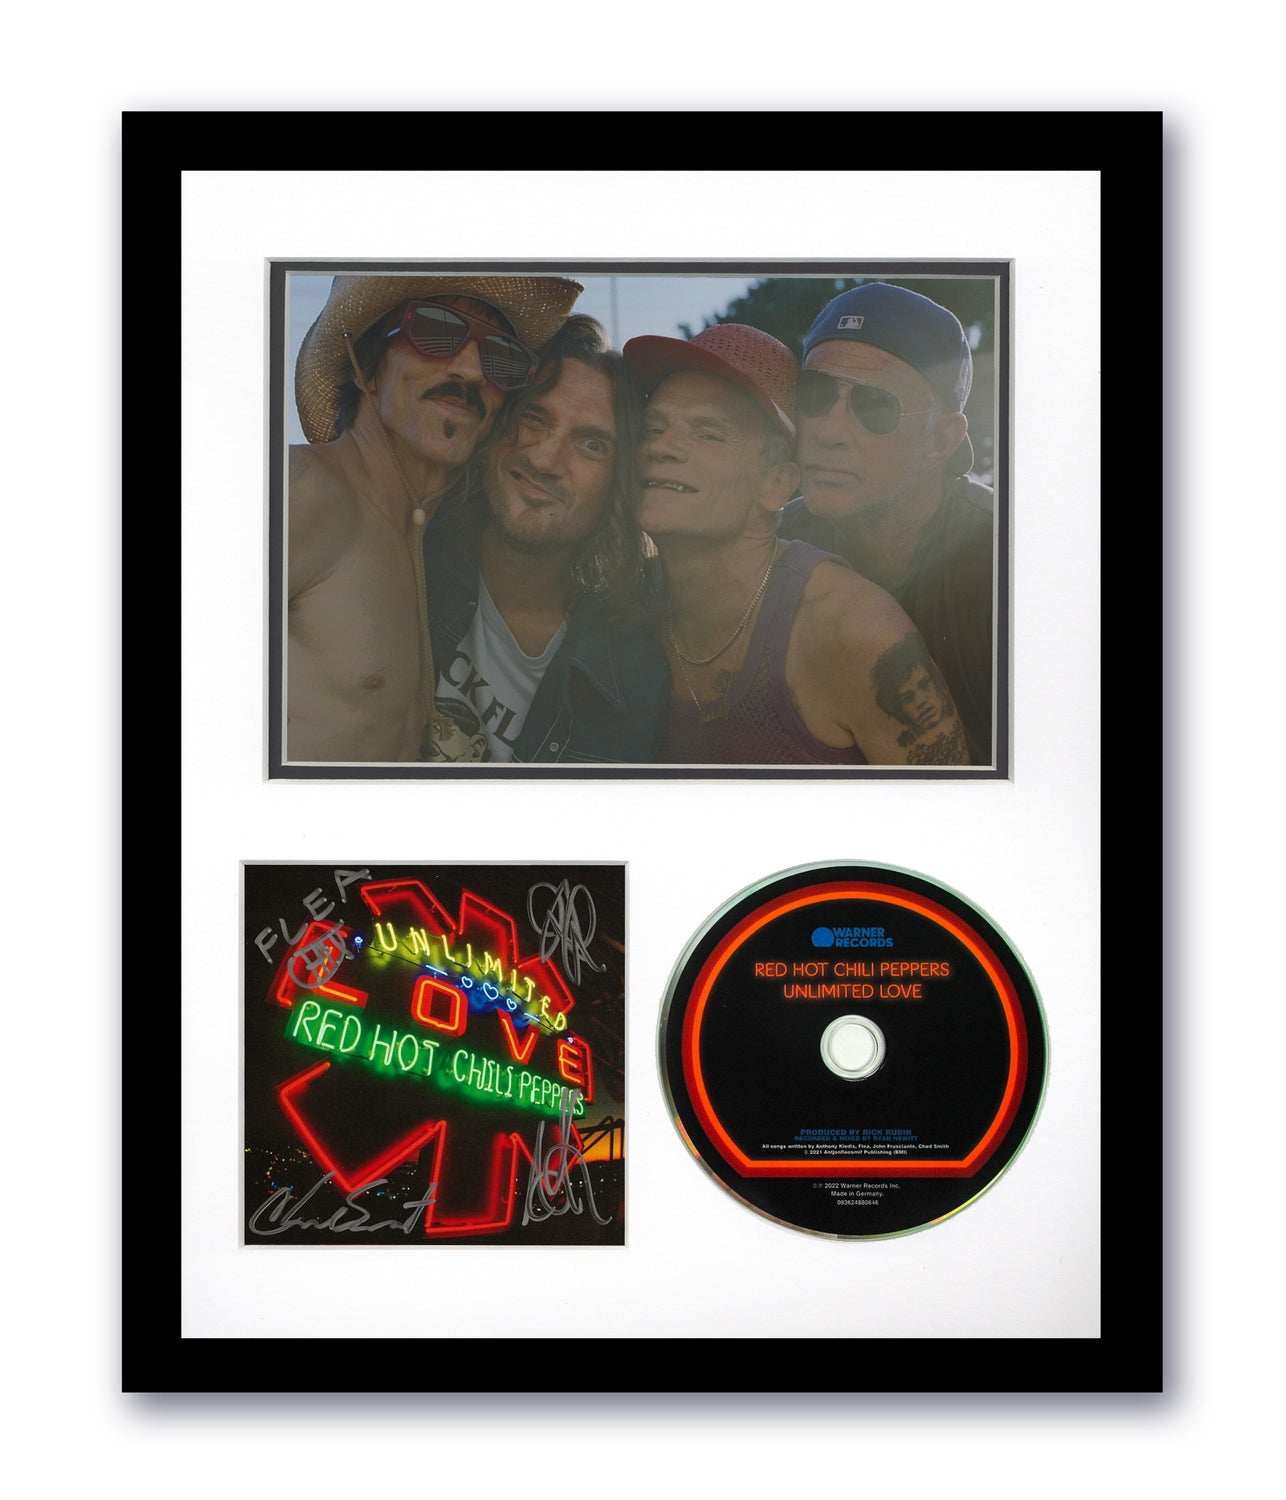 Red Hot Chili Peppers Signed 11x14 Framed CD Unlimited Love Autographed ACOA